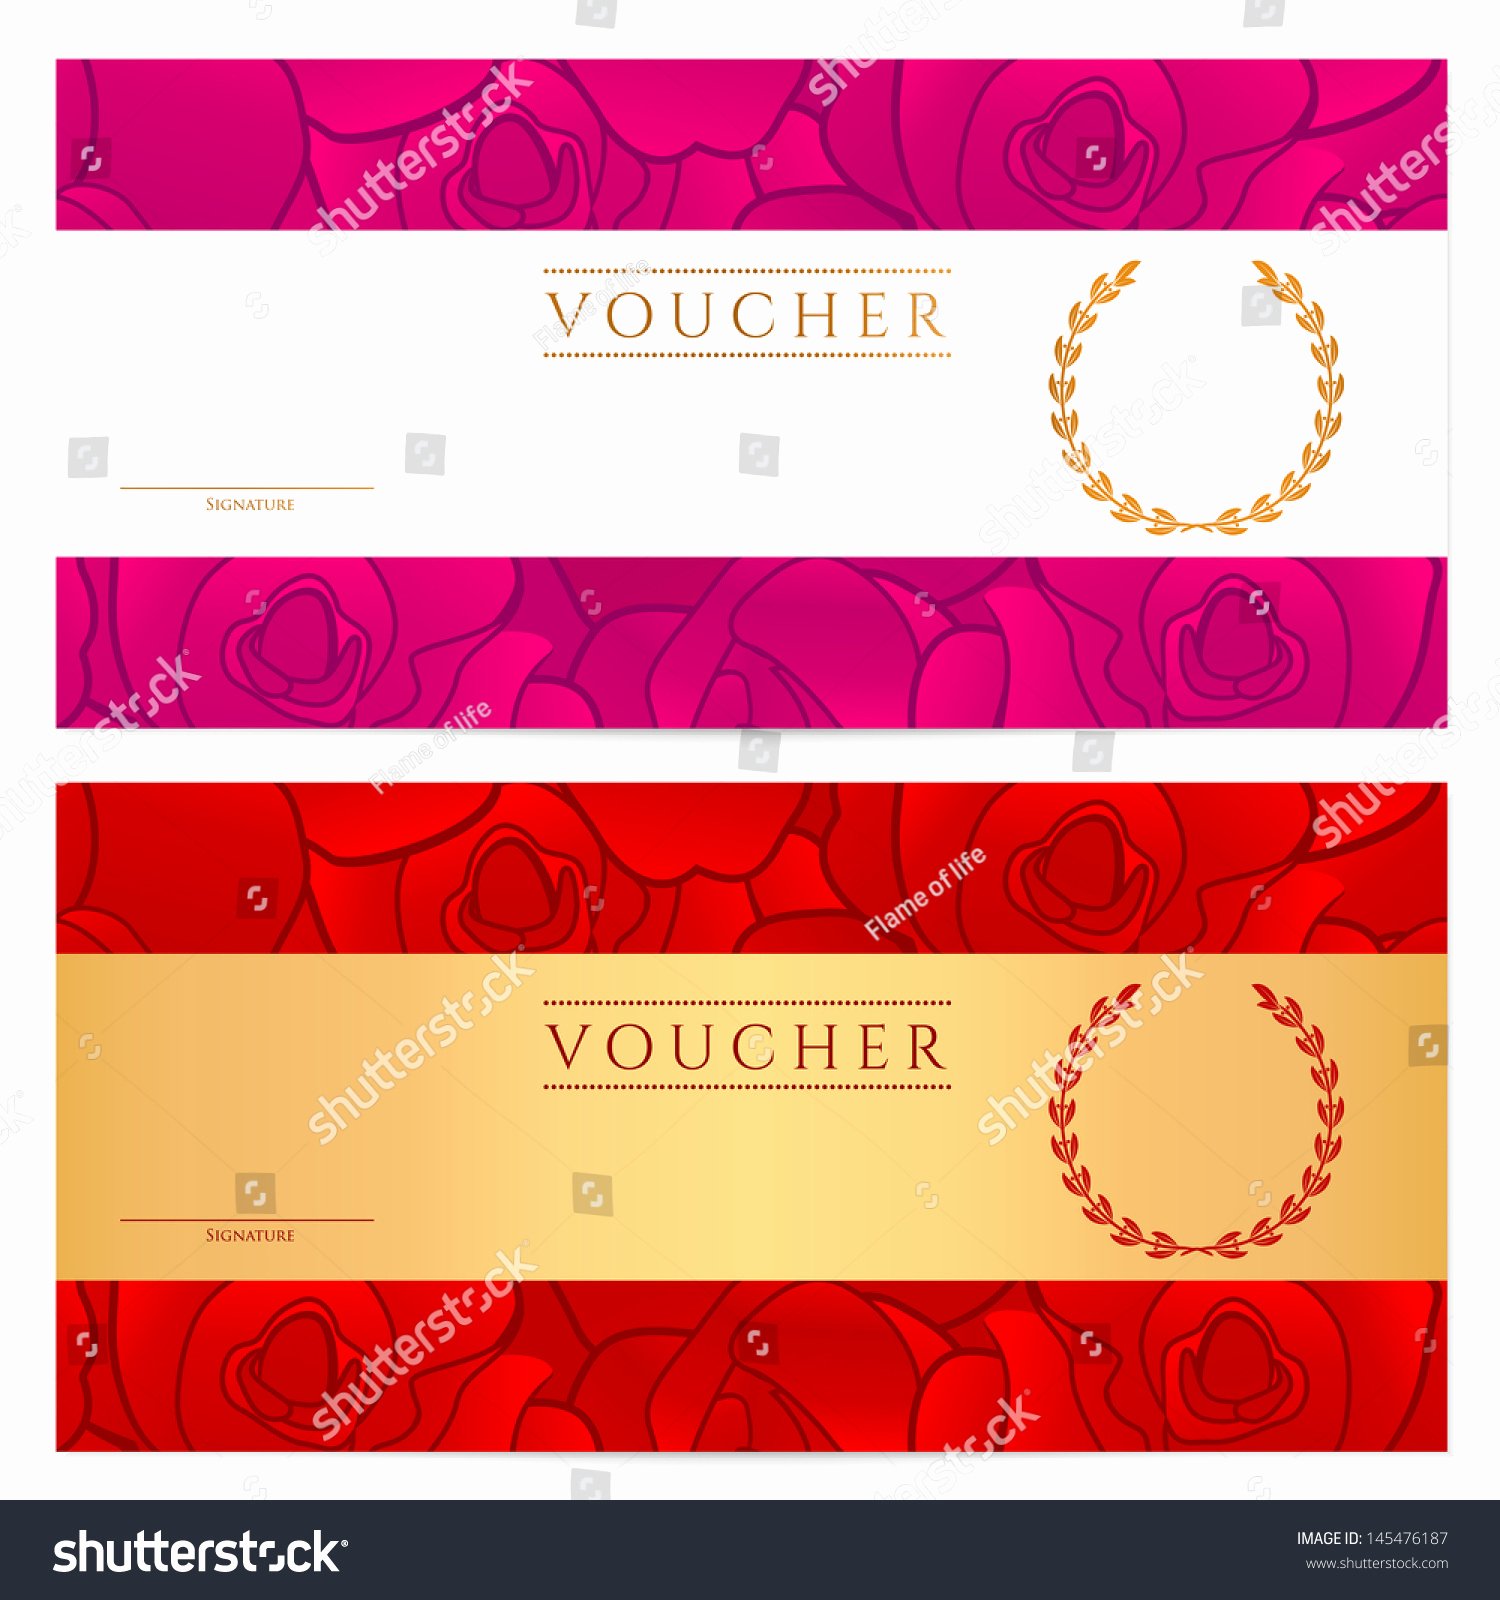 Photography Coupon Template Best Of Voucher Gift Certificate Coupon Template with Floral